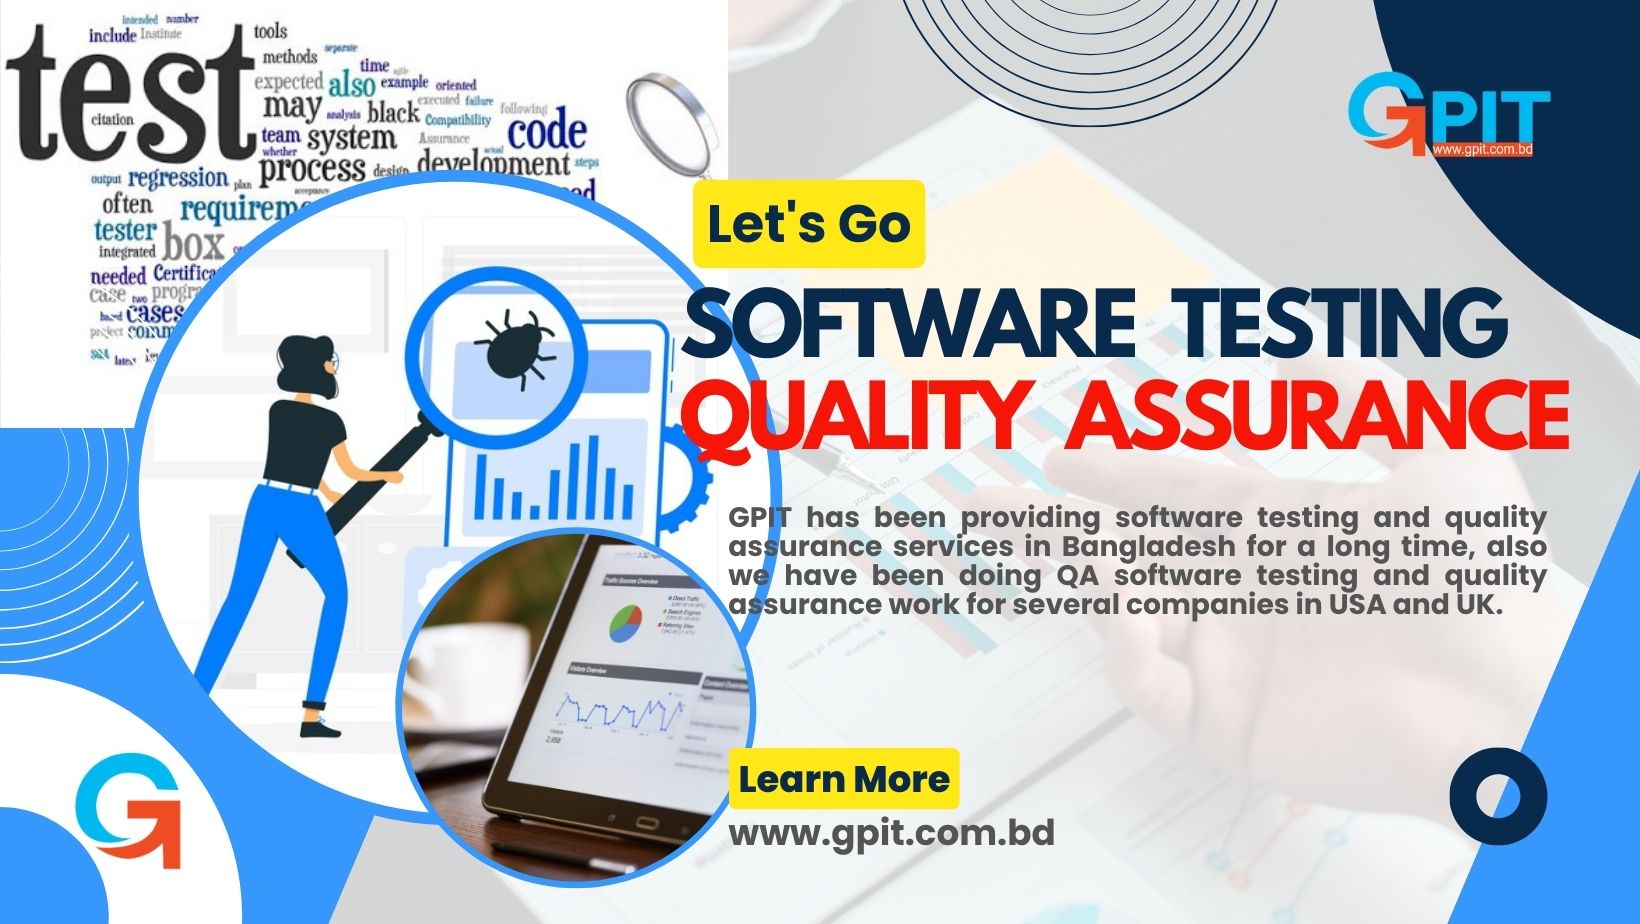 Software testing and quality assurance service